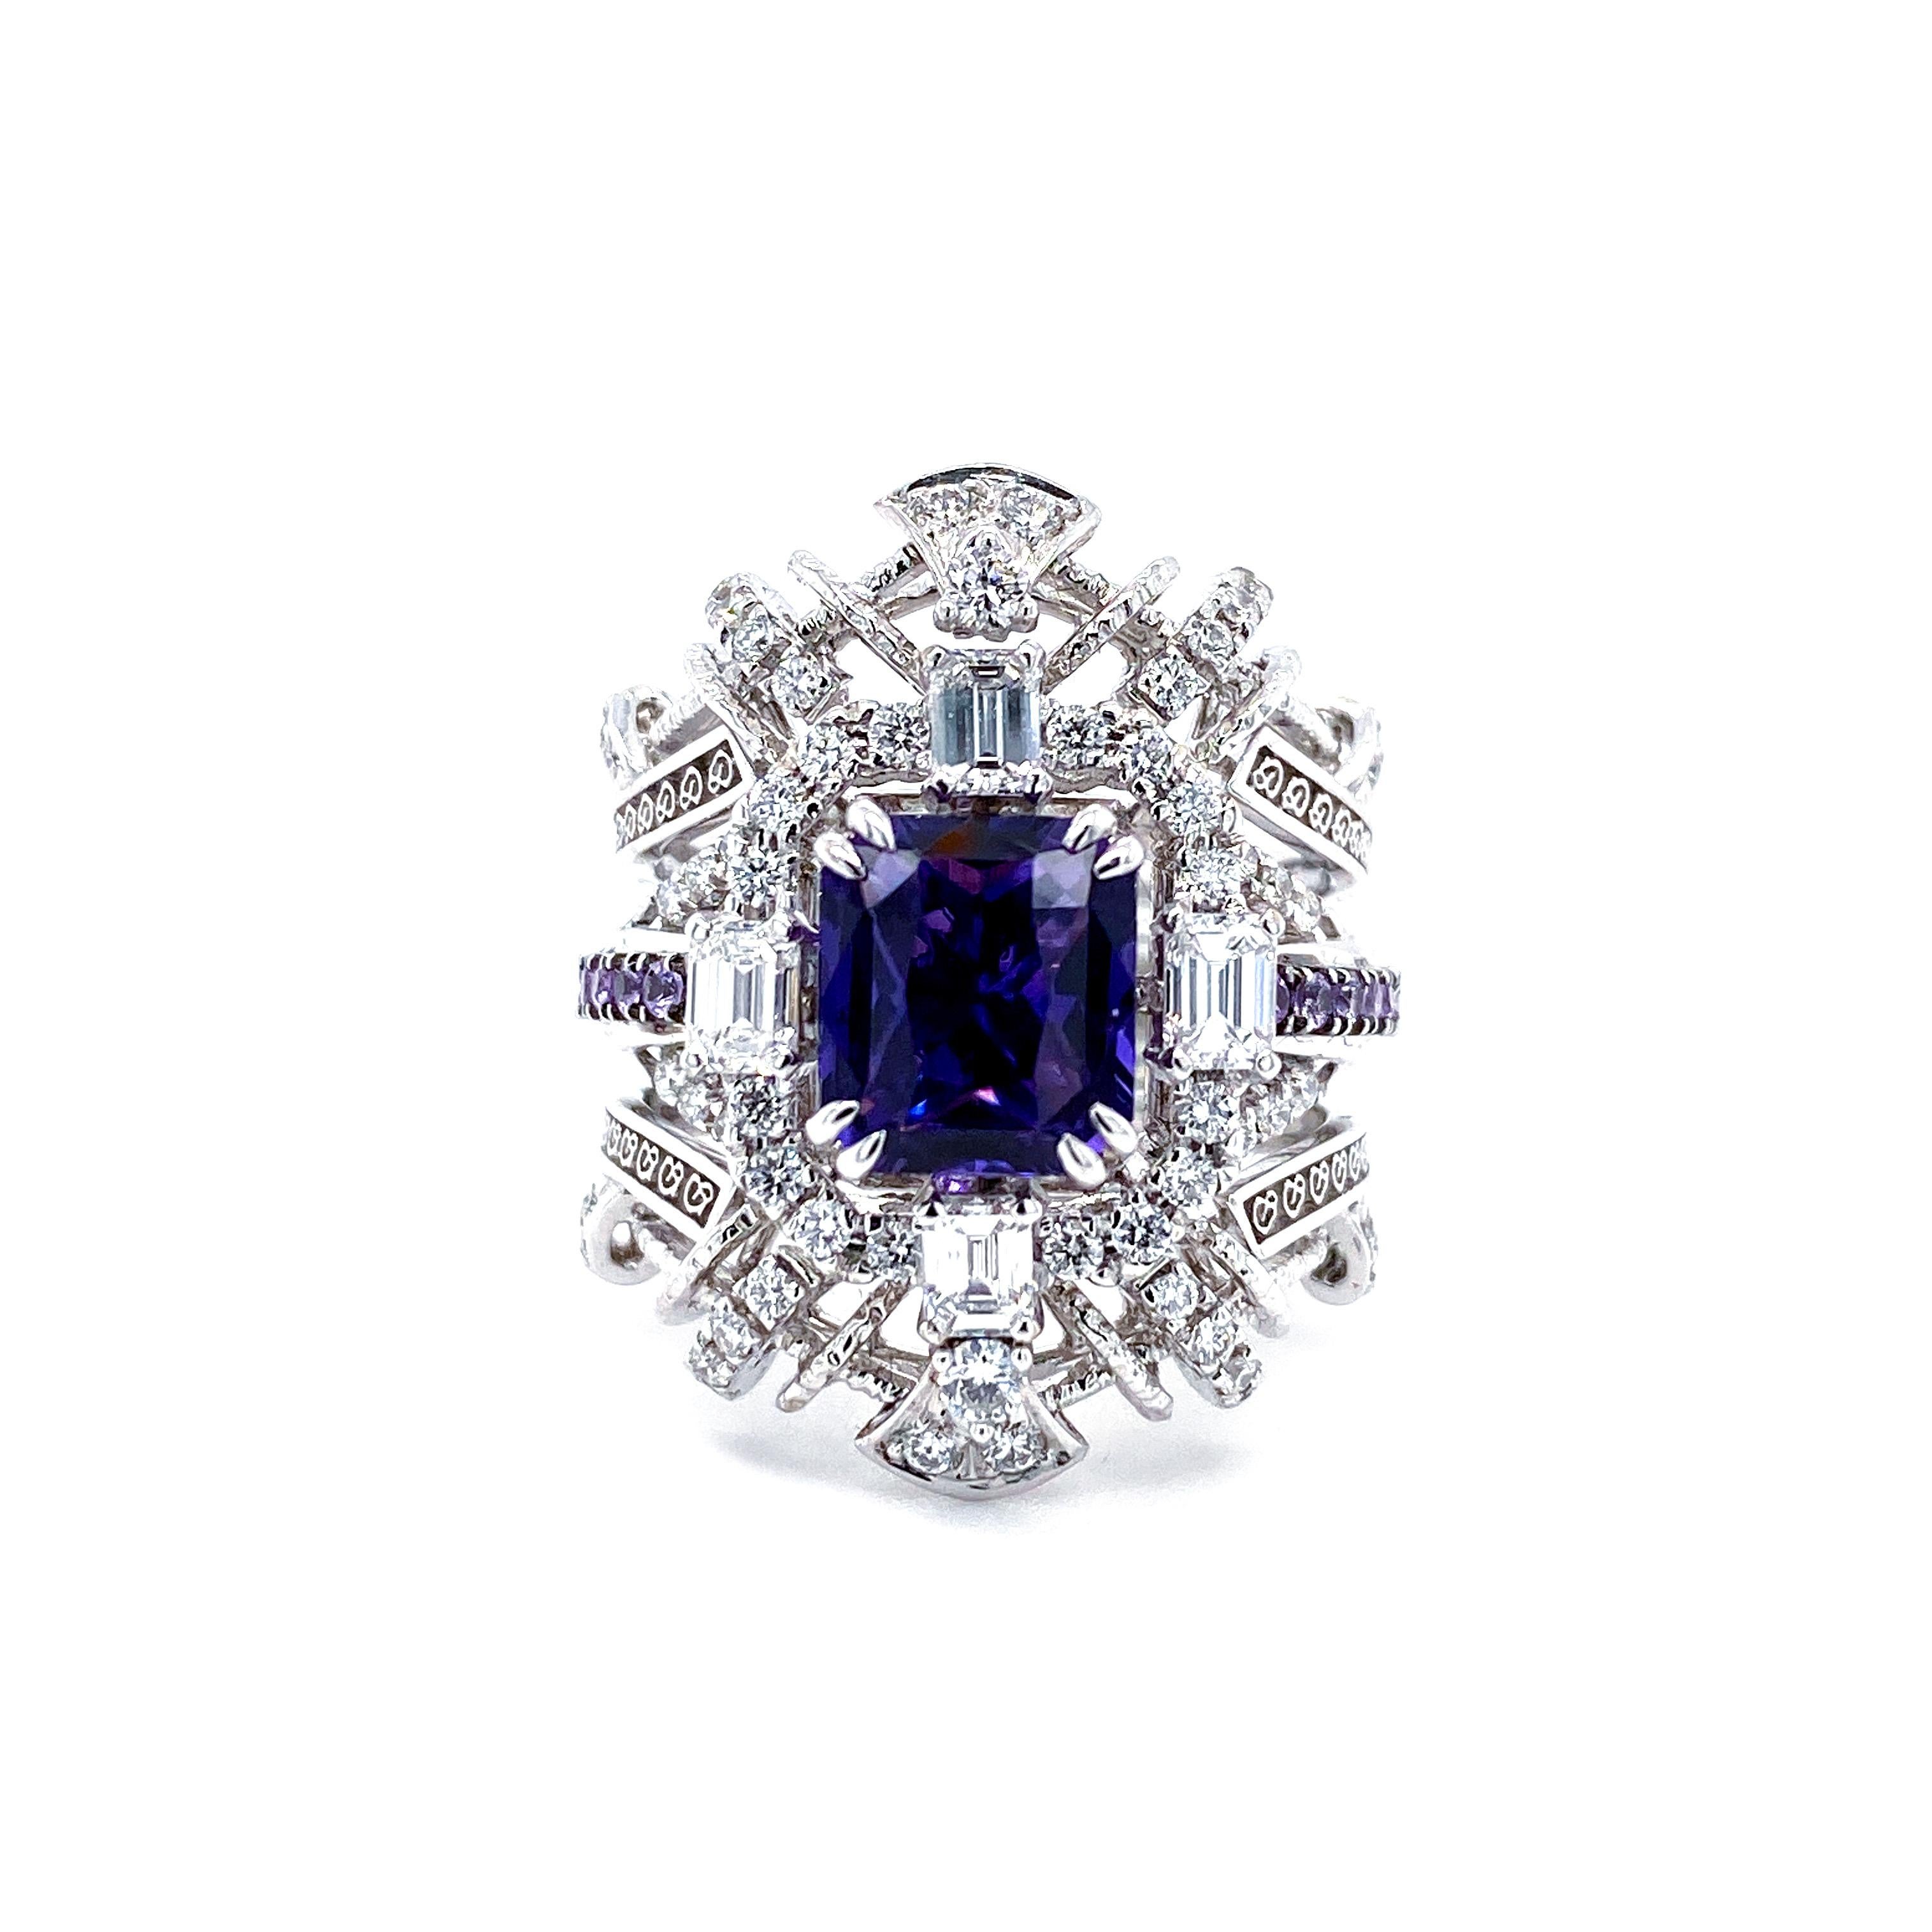 Mixed Cut 2.42 Carat Color-Changing Violet Sapphire and Diamond Collectible Ring